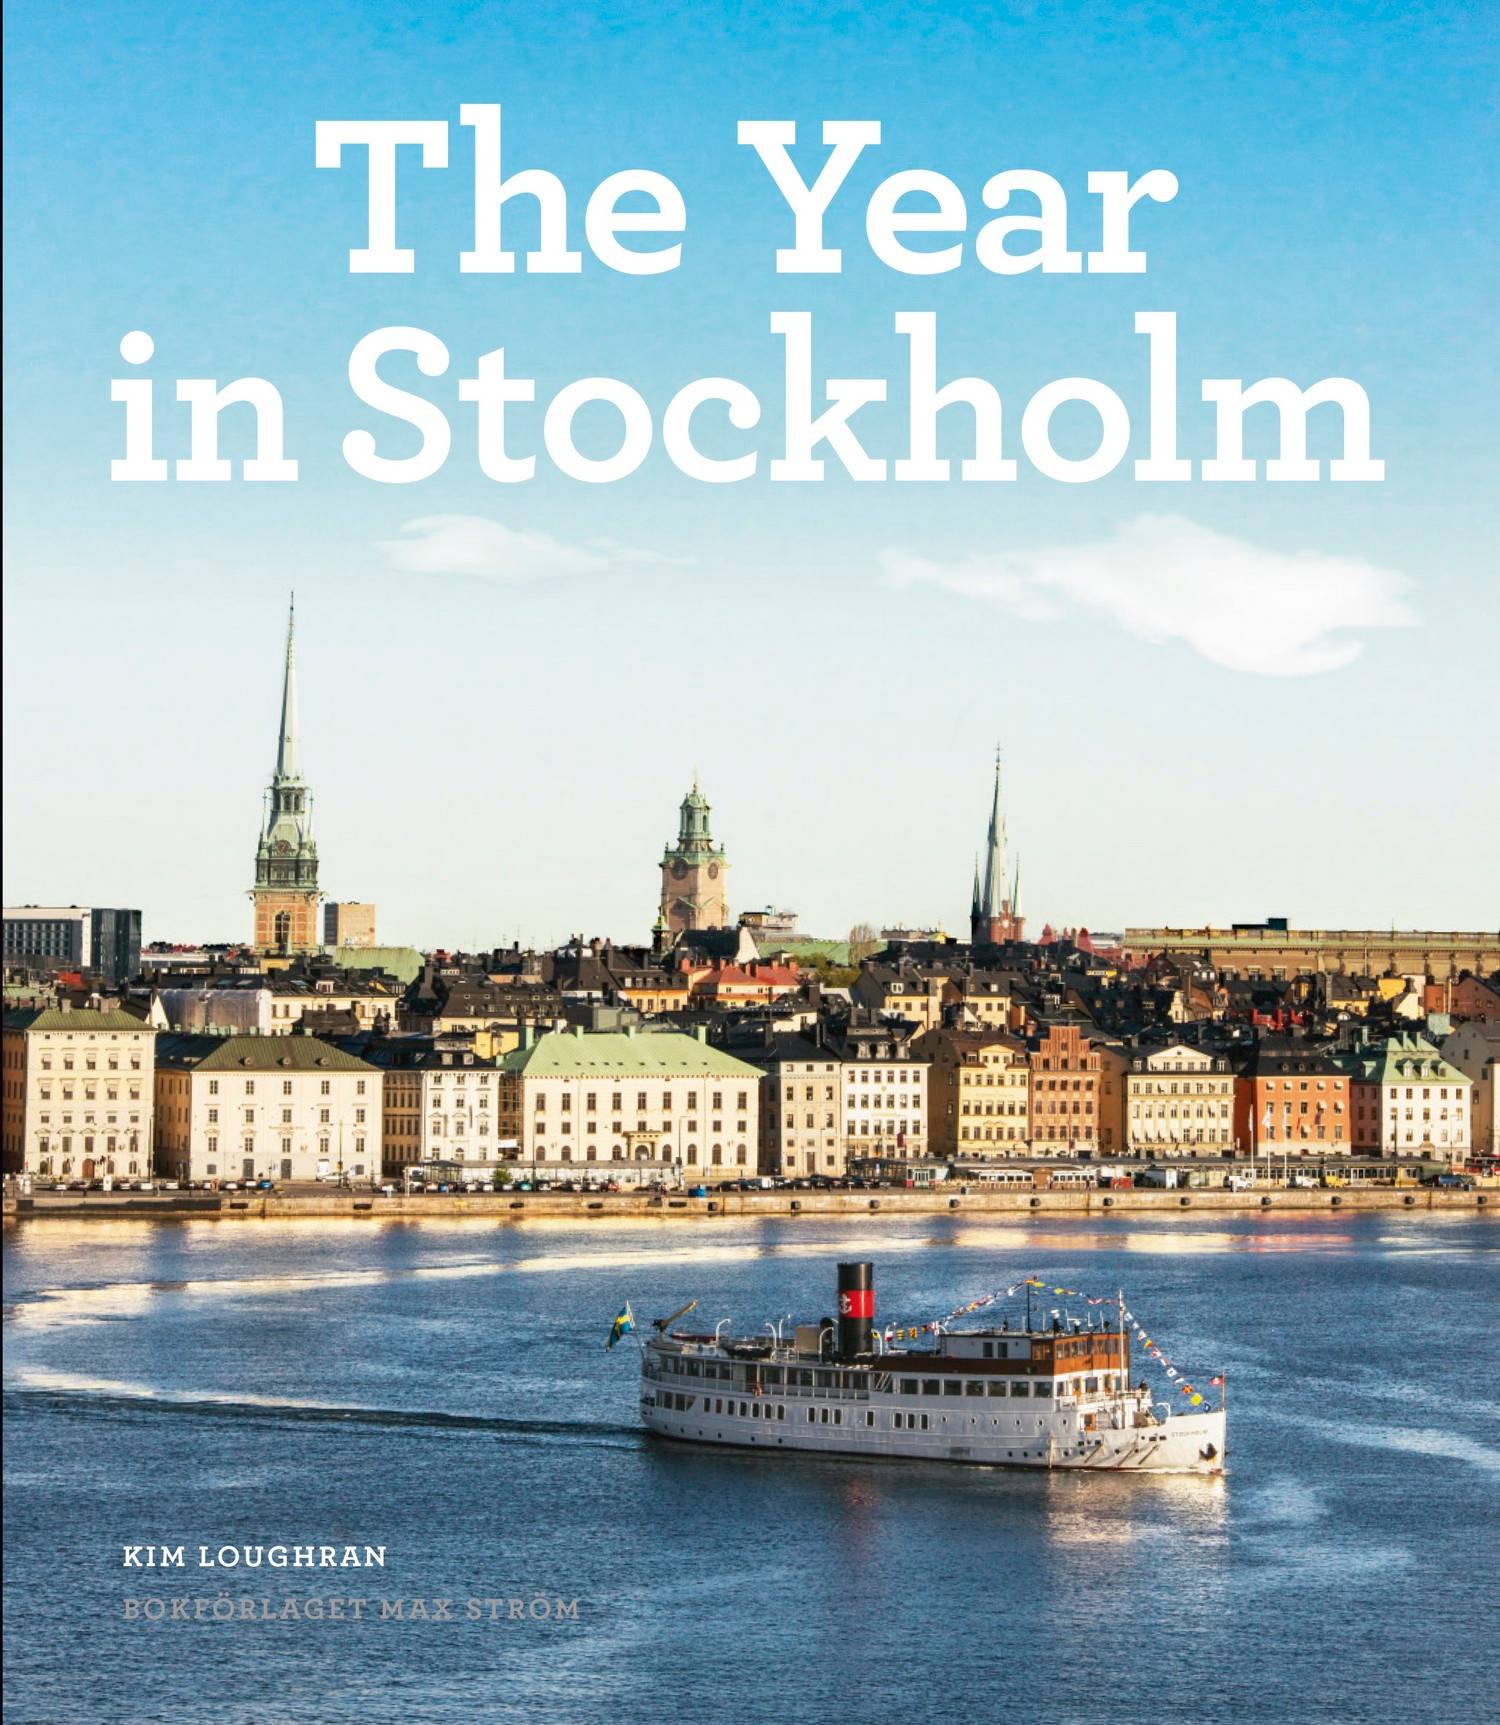 The year in Stockholm